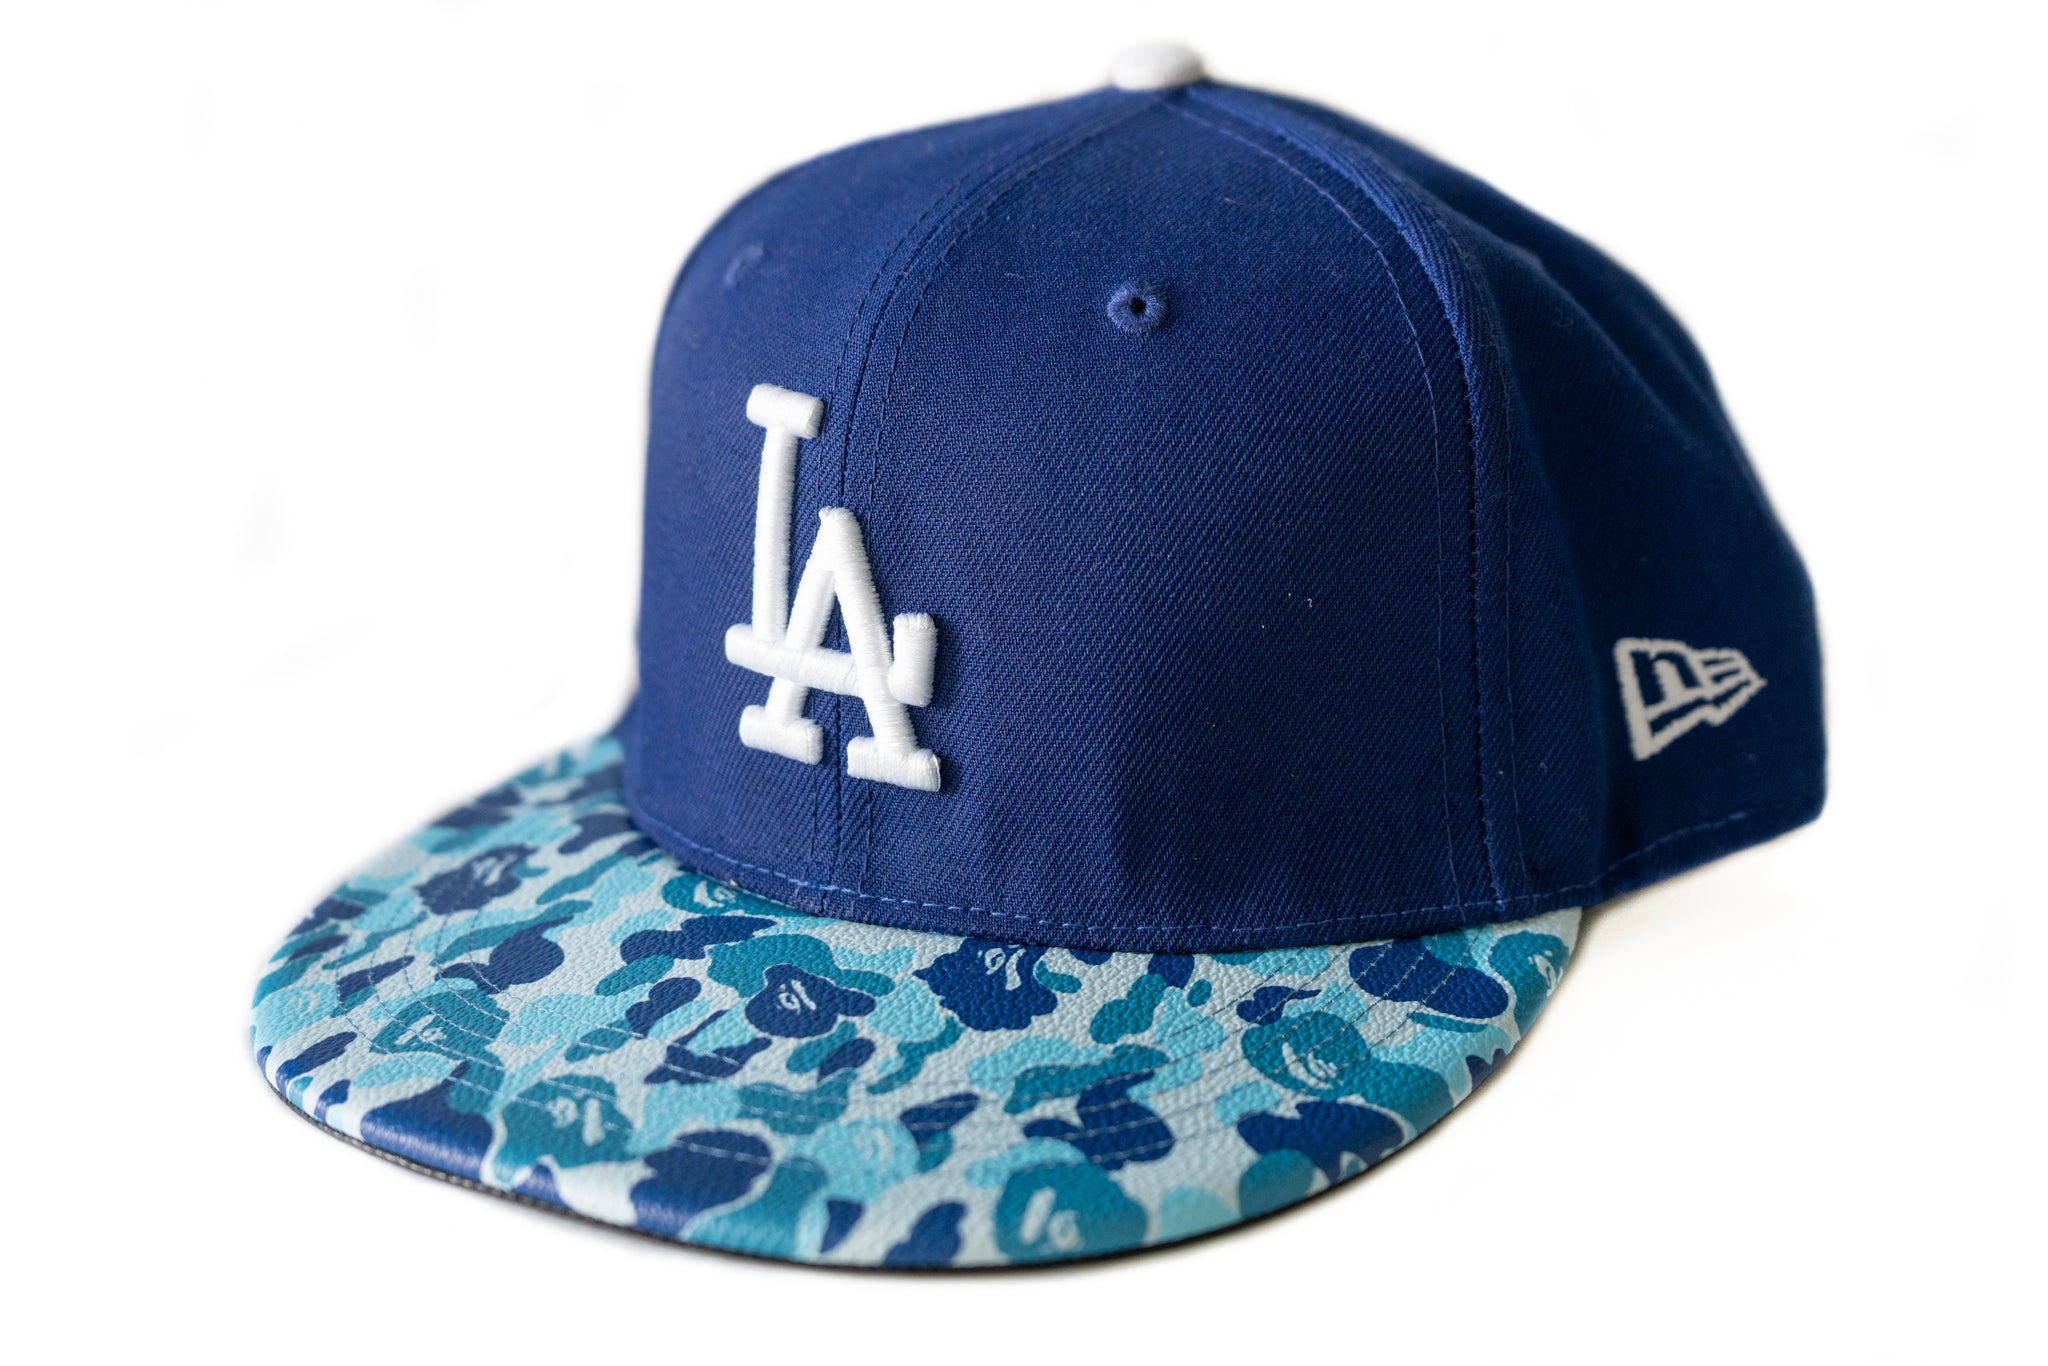 BAPE x New Era Los Angeles Dodgers Fitted